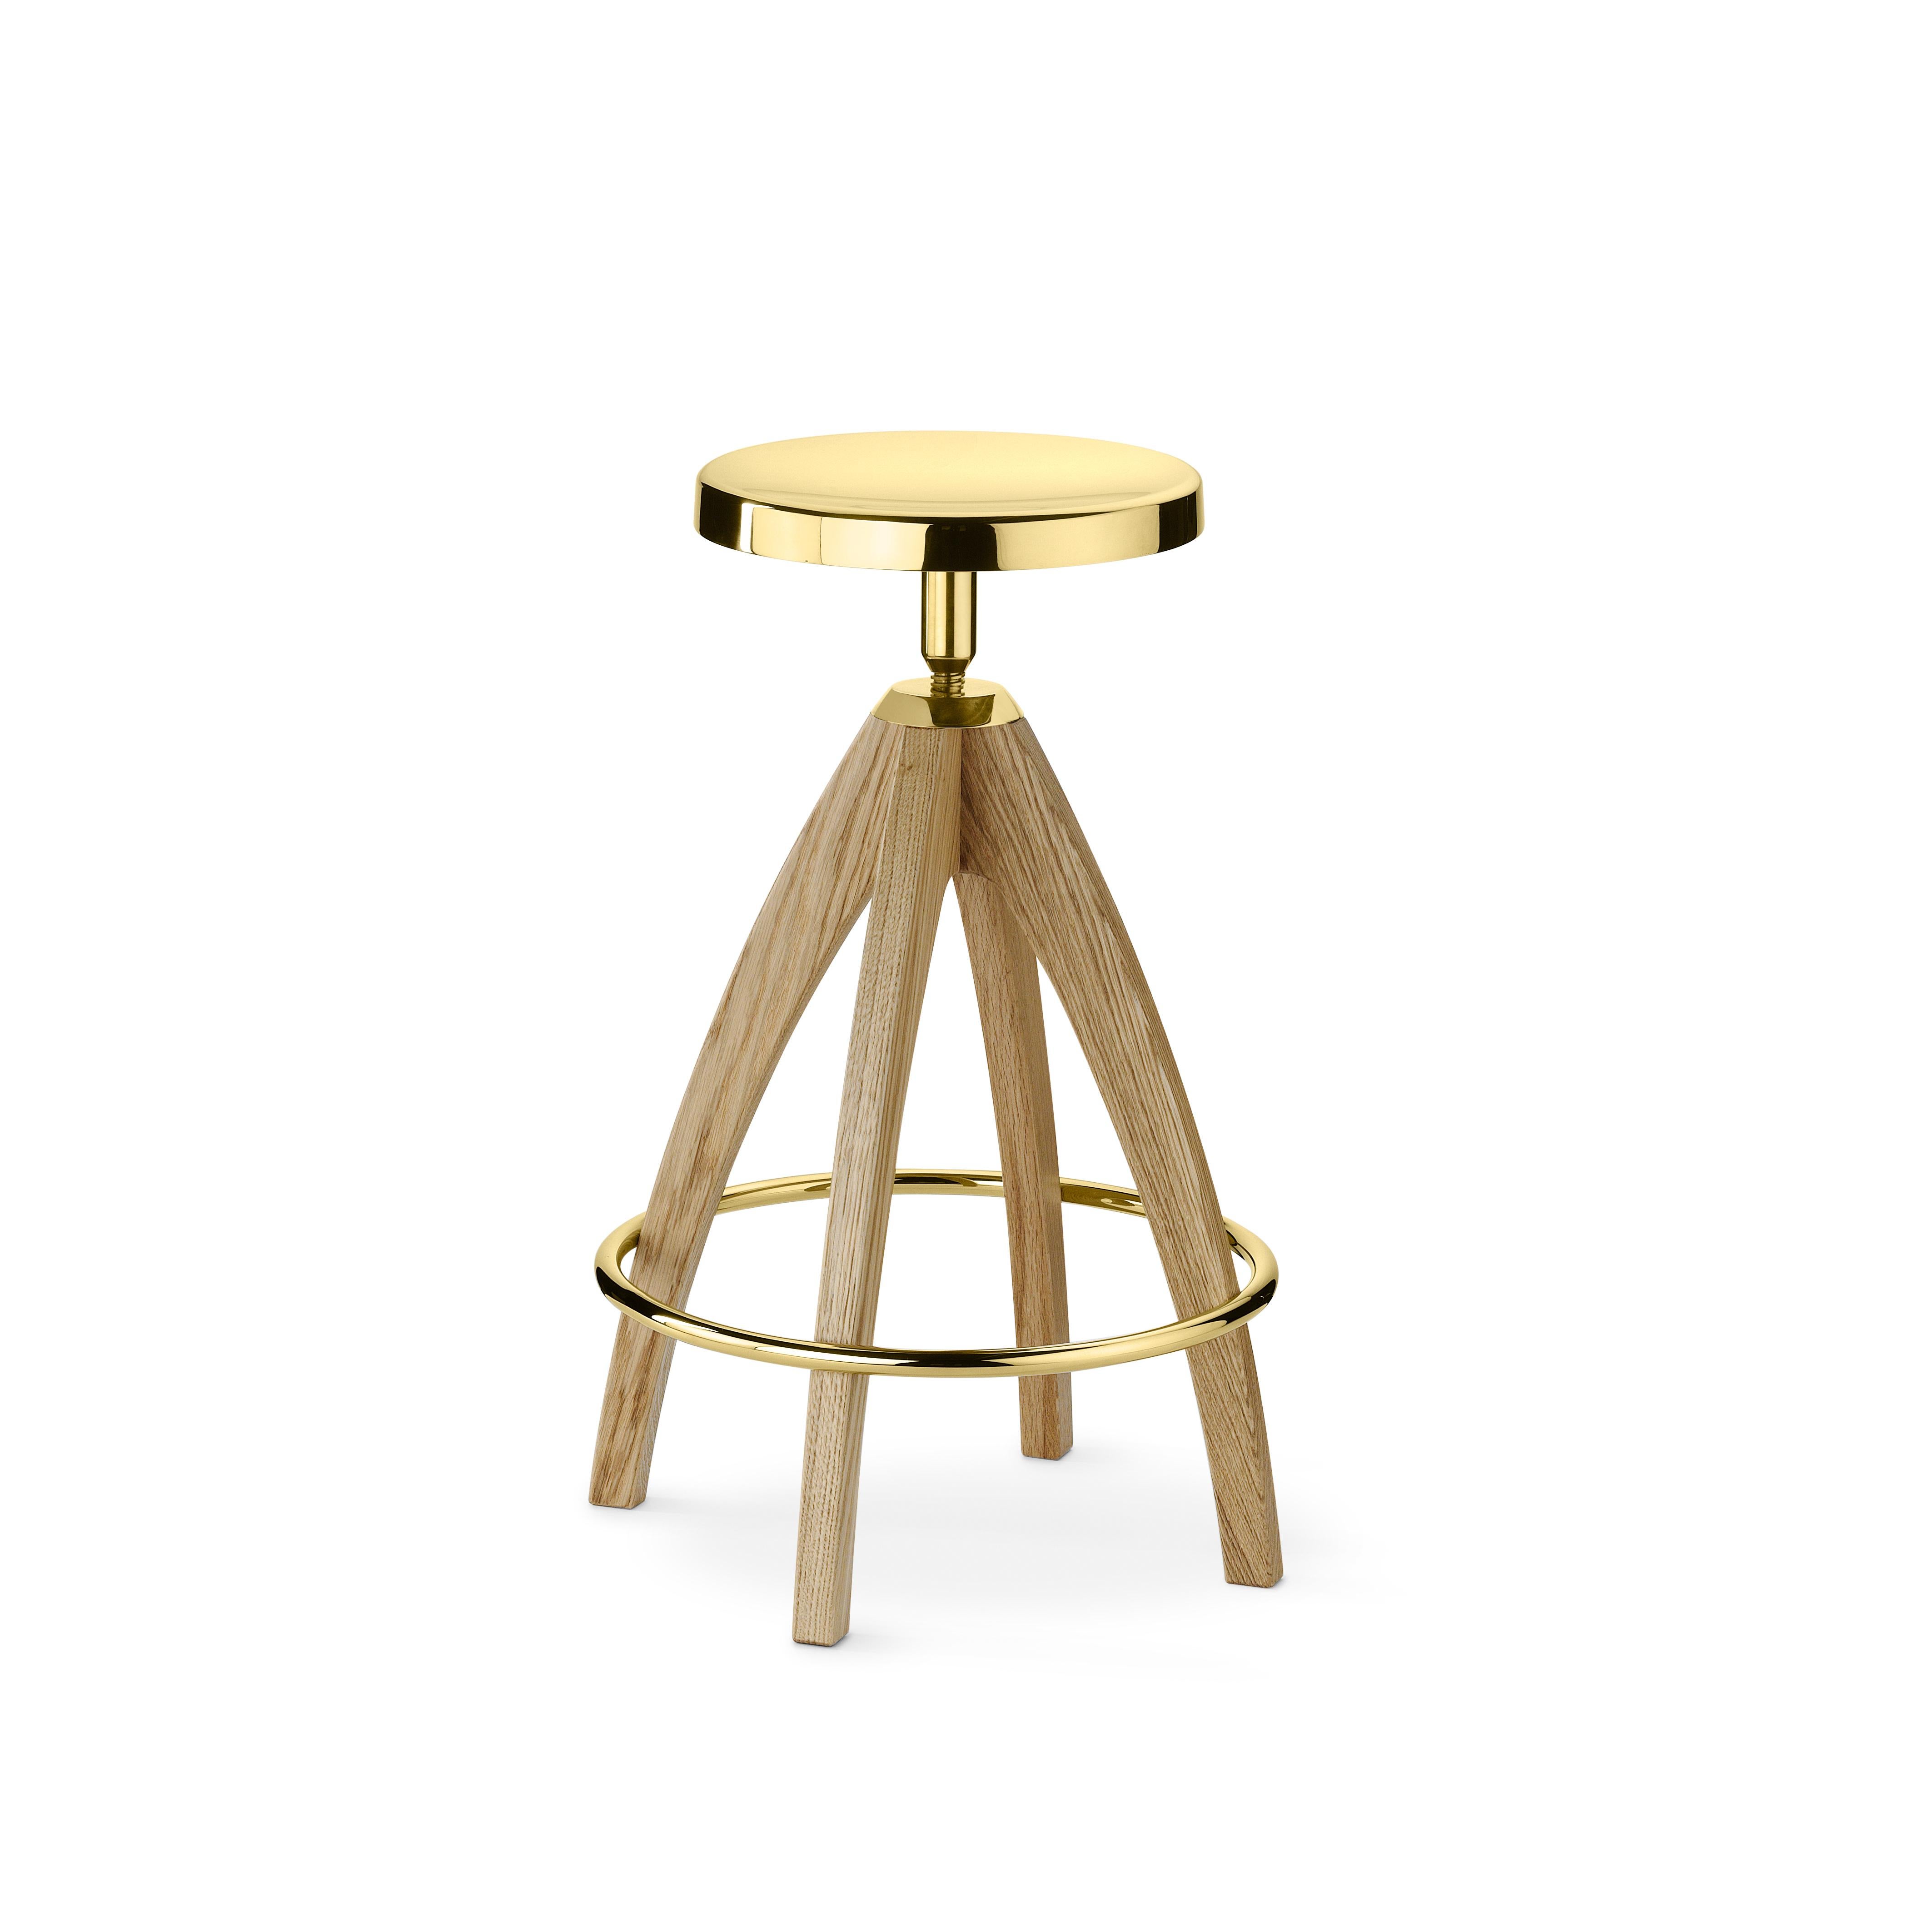 Bar stool in brass and light durmast
The height-adjustable stool, subject of which you can appreciate the adaptability with a gesture, in different contexts and users, becomes a precious object, with light or dark oak legs slightly bent and round